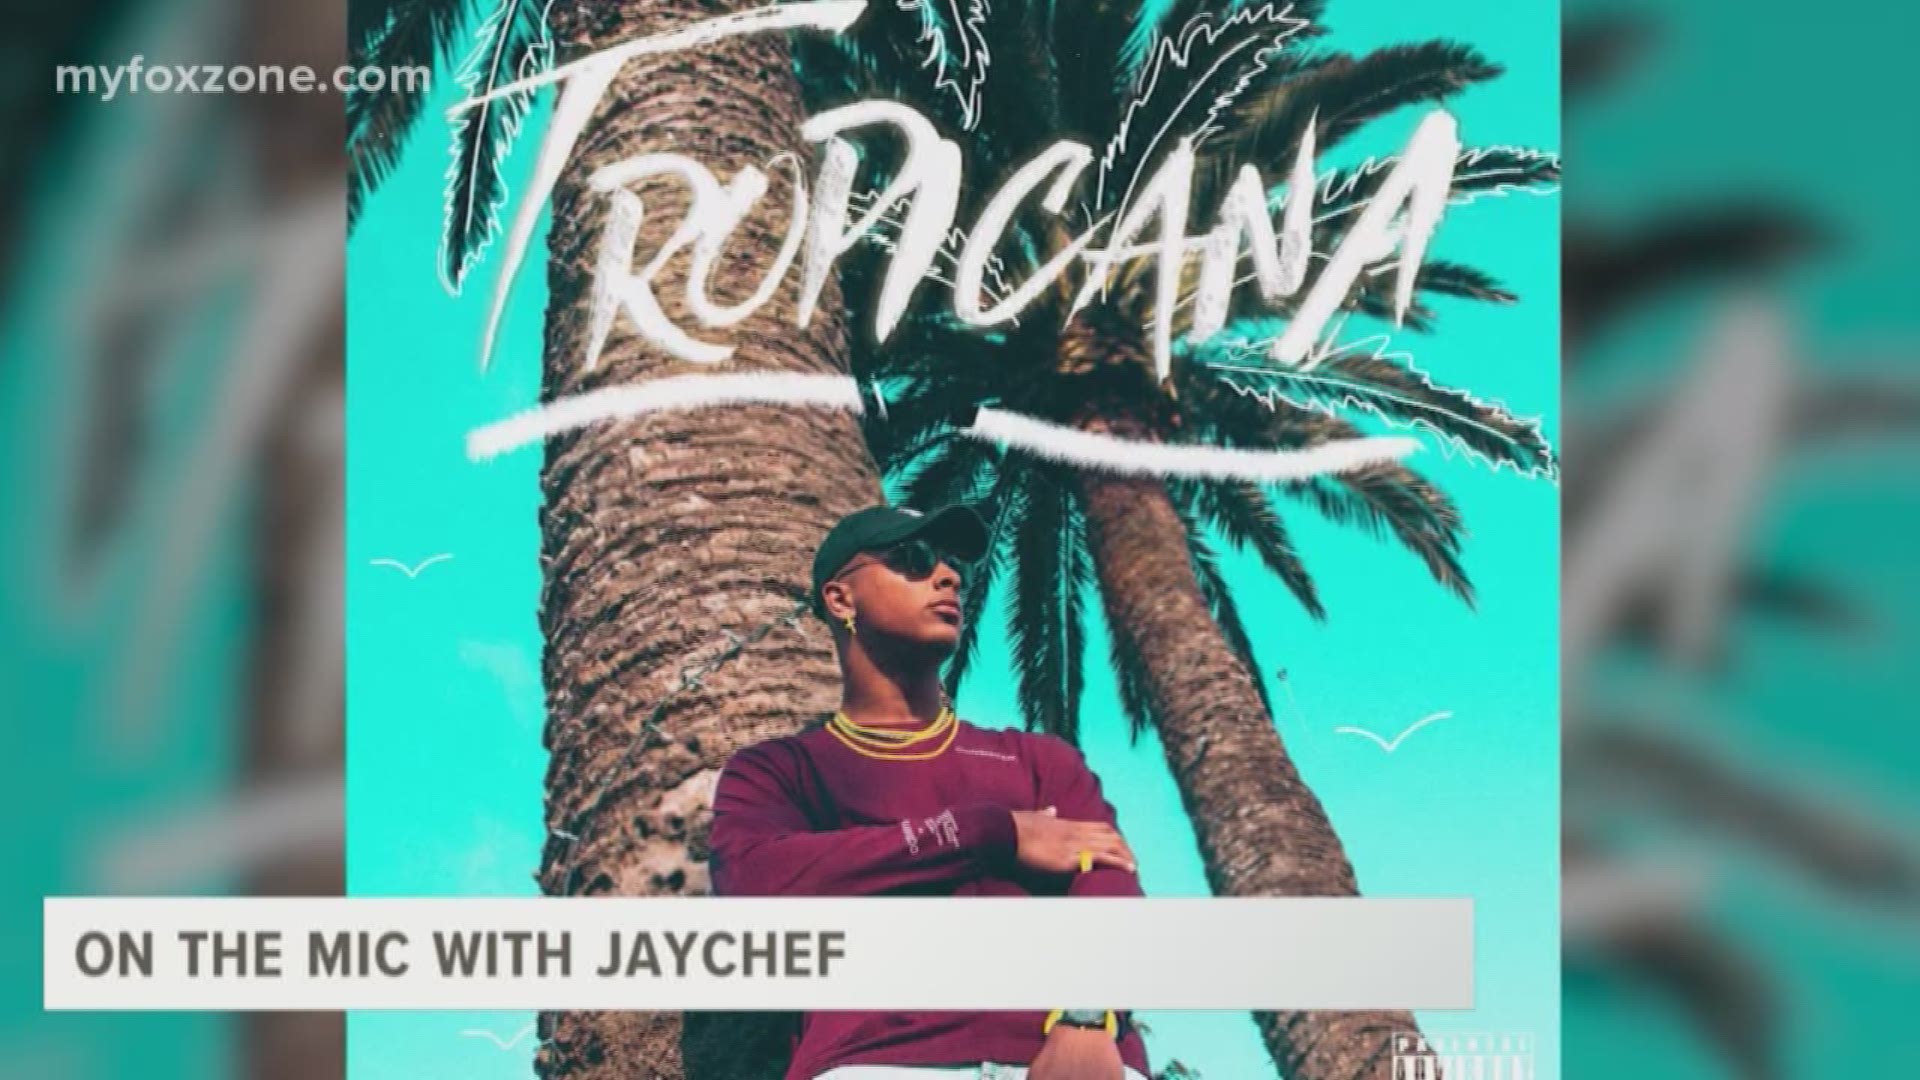 Off the basketball floor, Jalen Terry is known as Jaychef, an aspiring musician. He brings a blend of West Coast vibes and positive energy to his music. It helps people learn more about him.